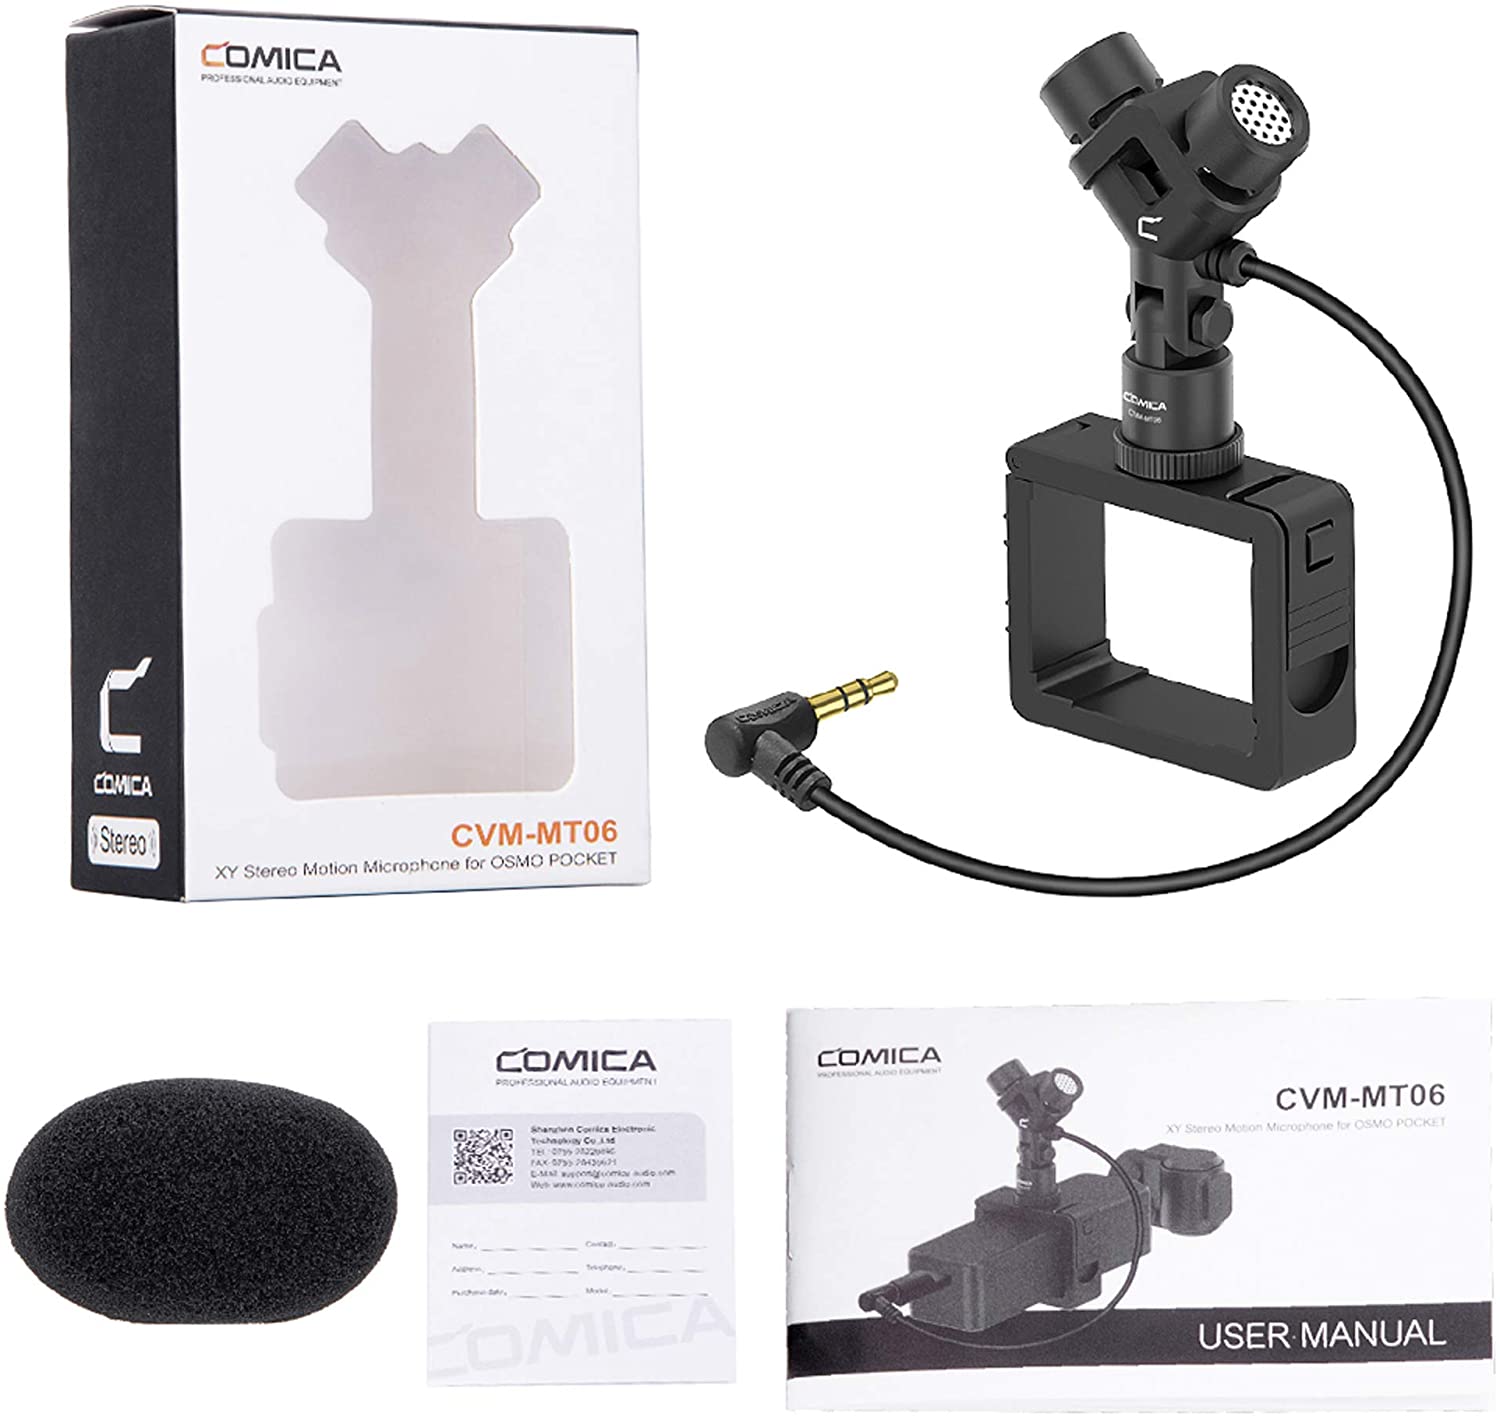 CVM-MT06 Mini Cardioid XY Stereo Microphone Osmo Pocket Mic DJI OSMO Accessories for Video Recording Vlogging Youtube